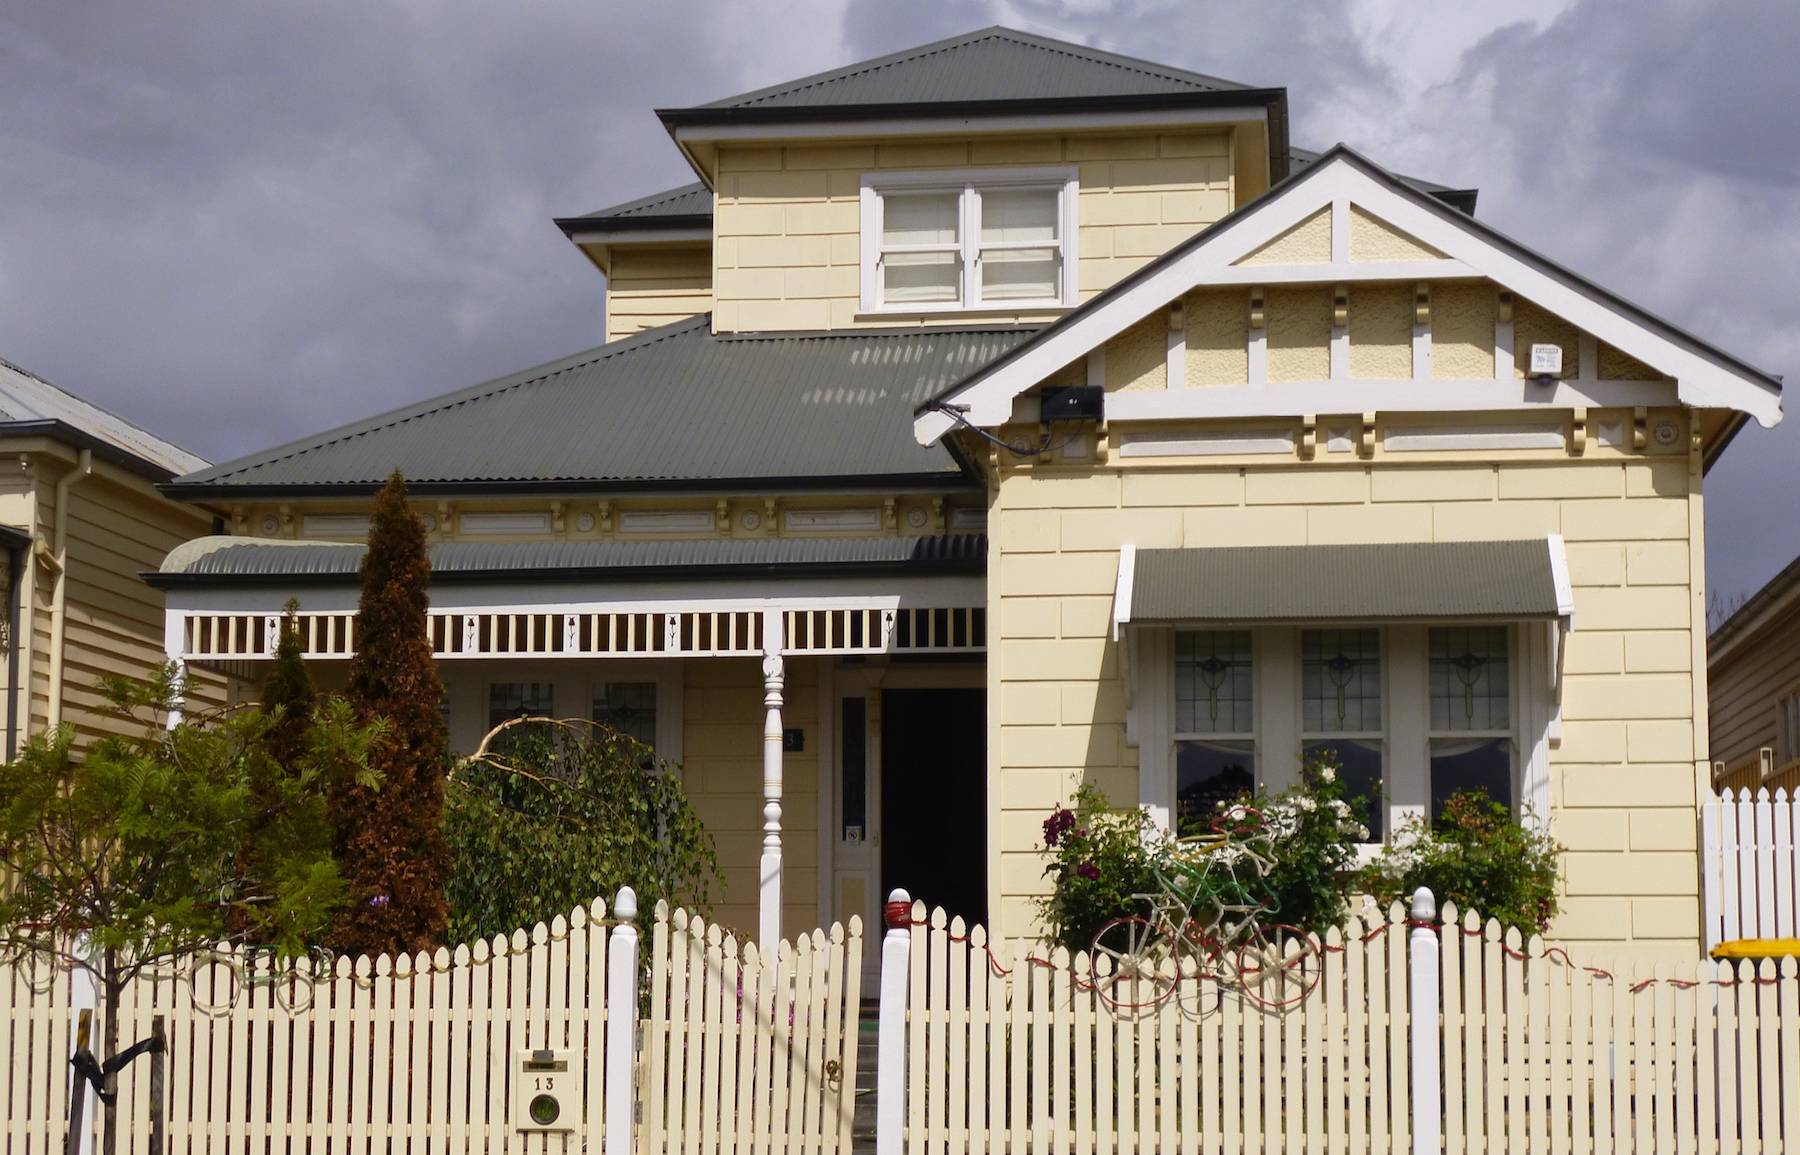 Home Extension Builders in Melbourne